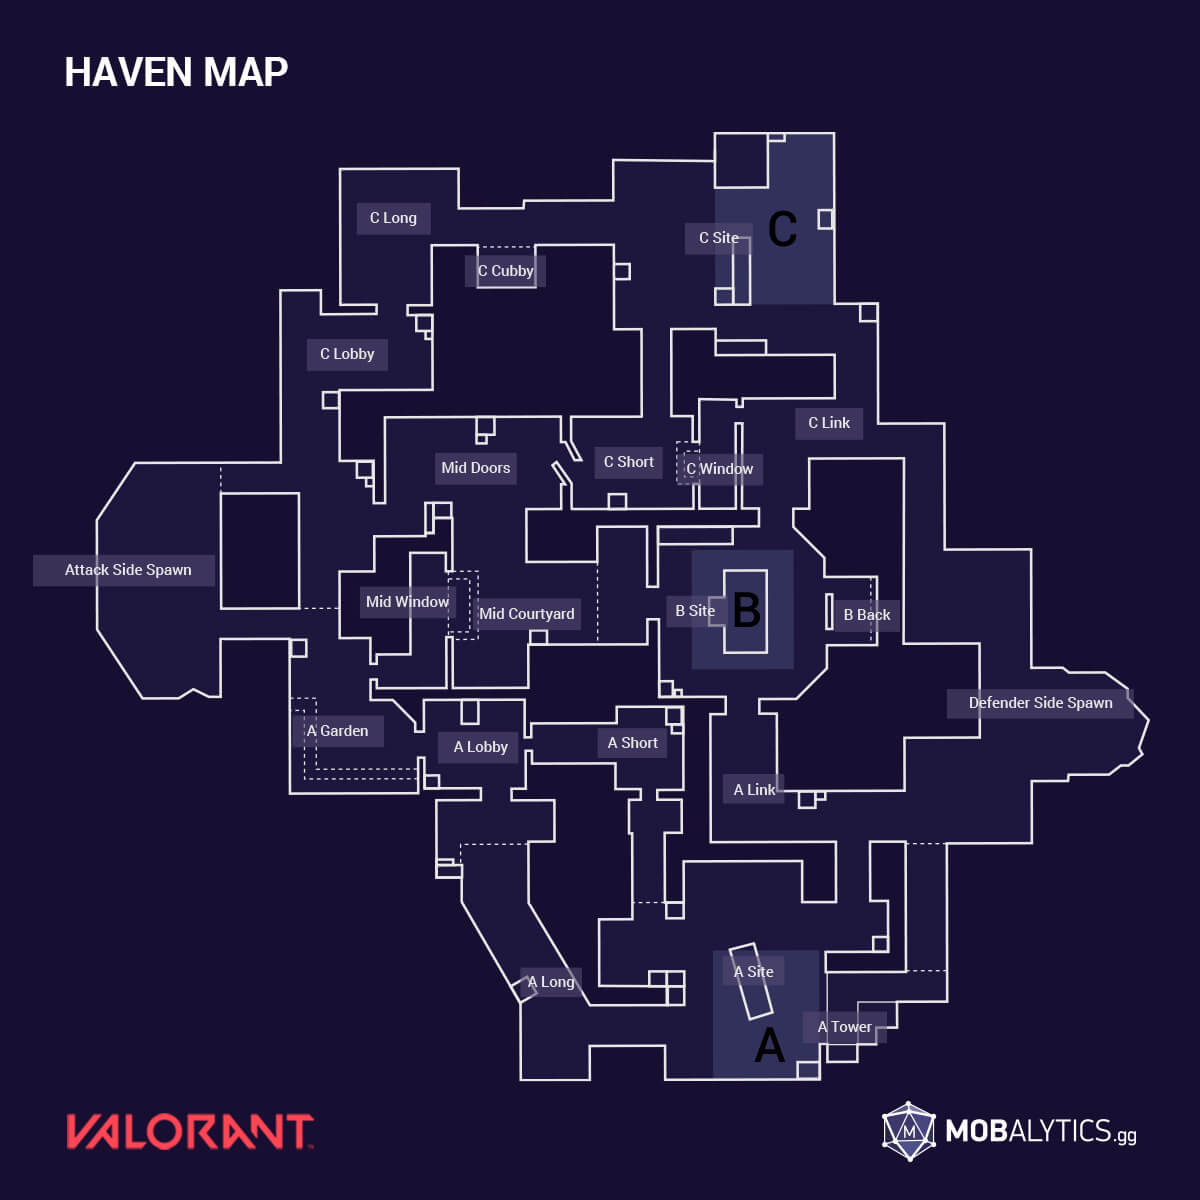 The Best VALORANT Maps (Ranked 1st to 7th) - Mobalytics